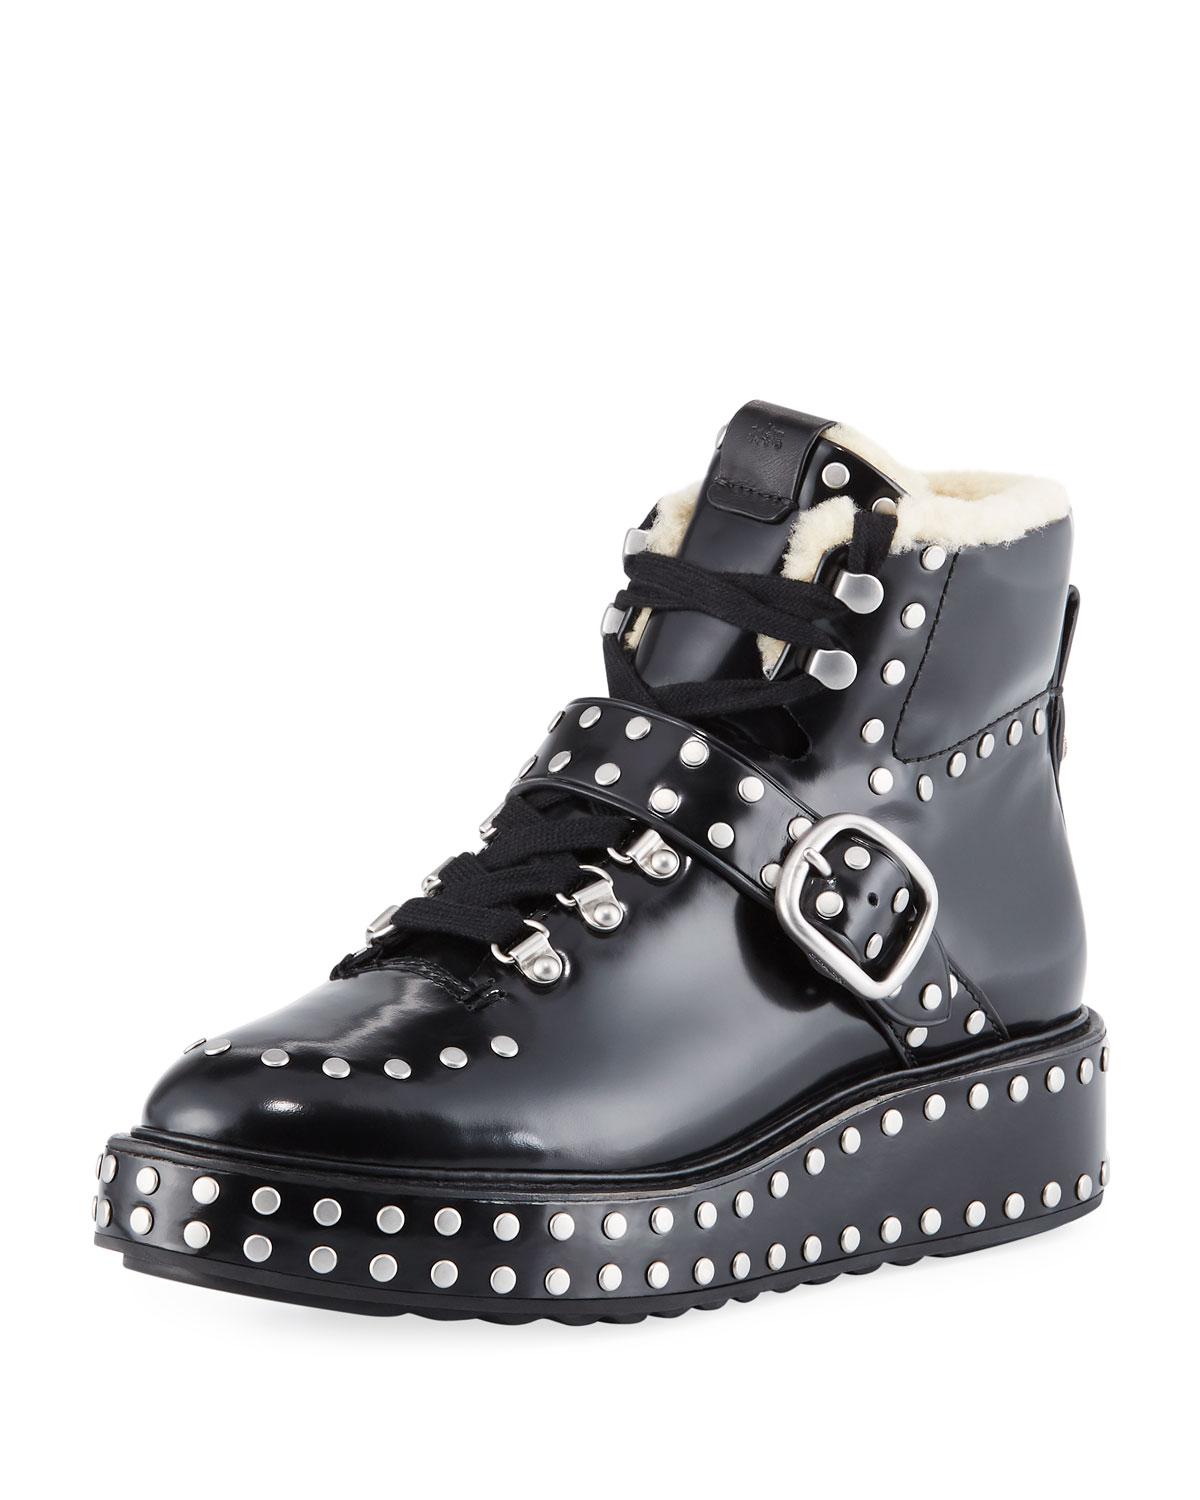 Lyst - Coach Urban Hiker Studded Boots in Black